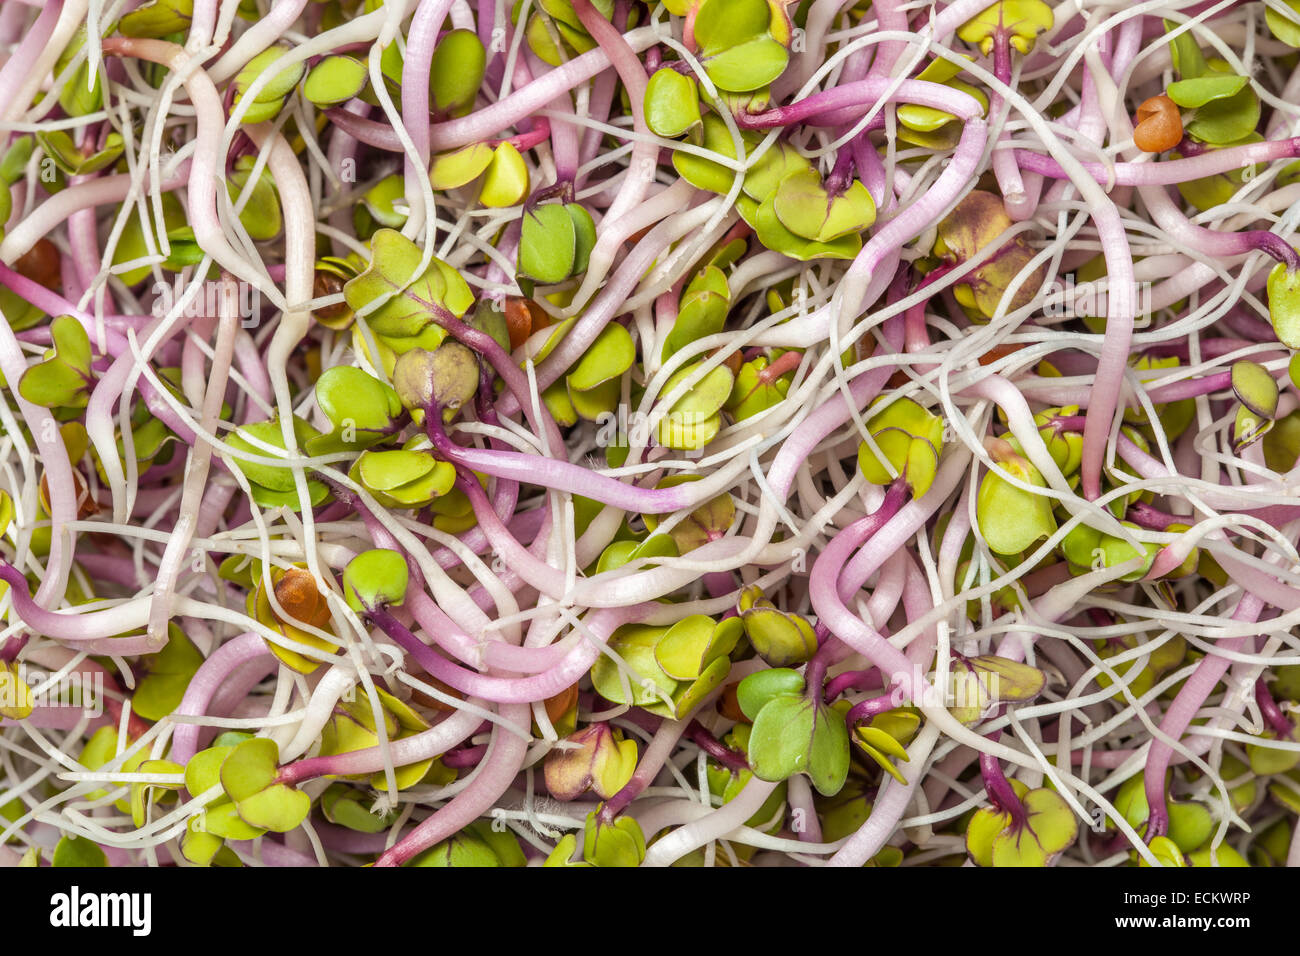 Young sprouted seeds of alfalfa with green leafs. Stock Photo